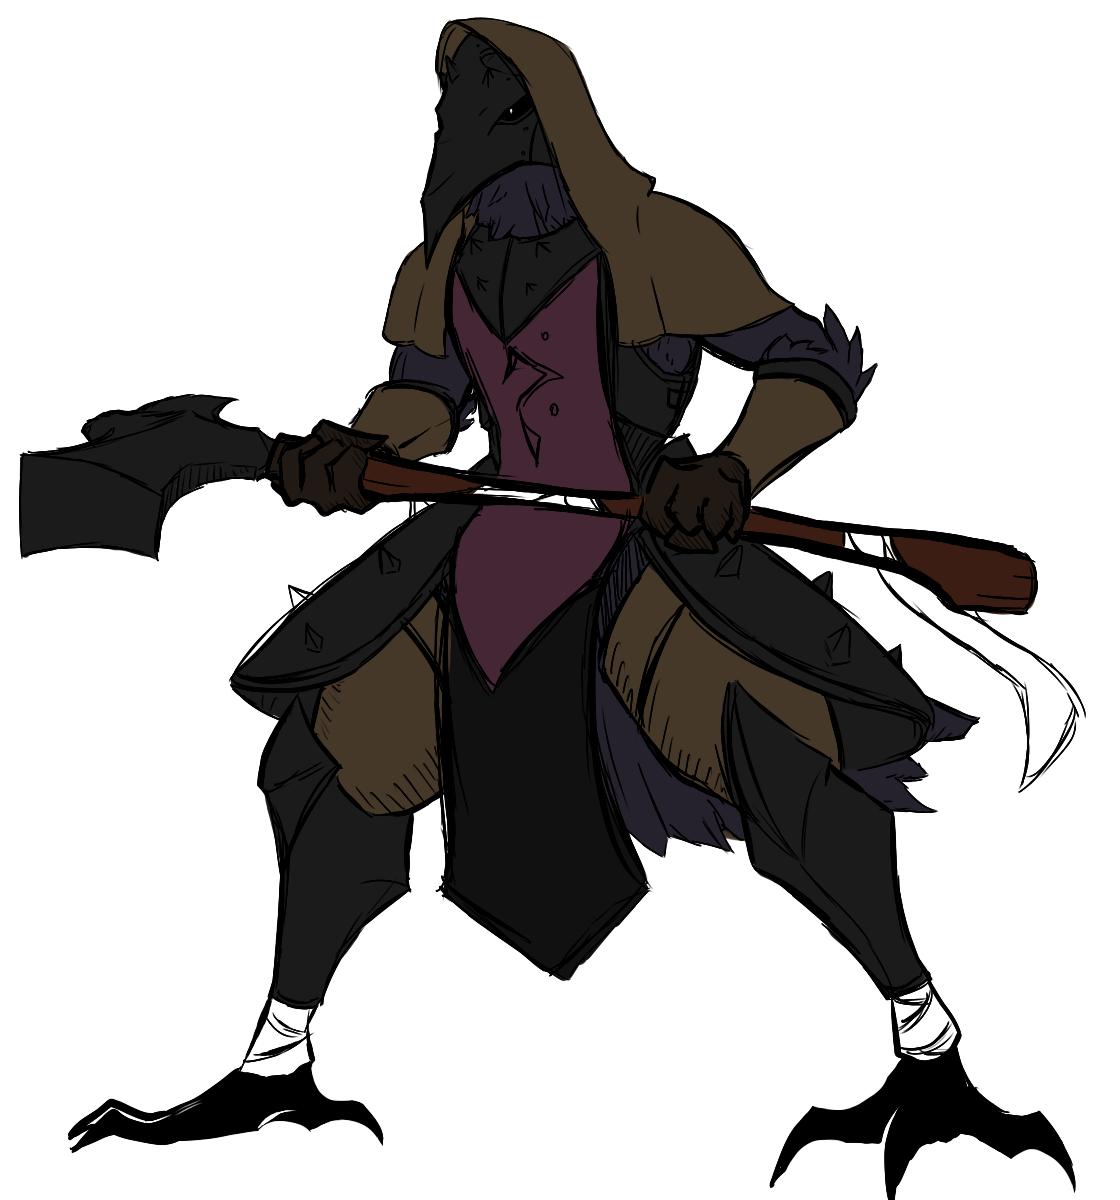 Here's my Kenku Paladin from our current DnD campaign! pic.twitter.com...